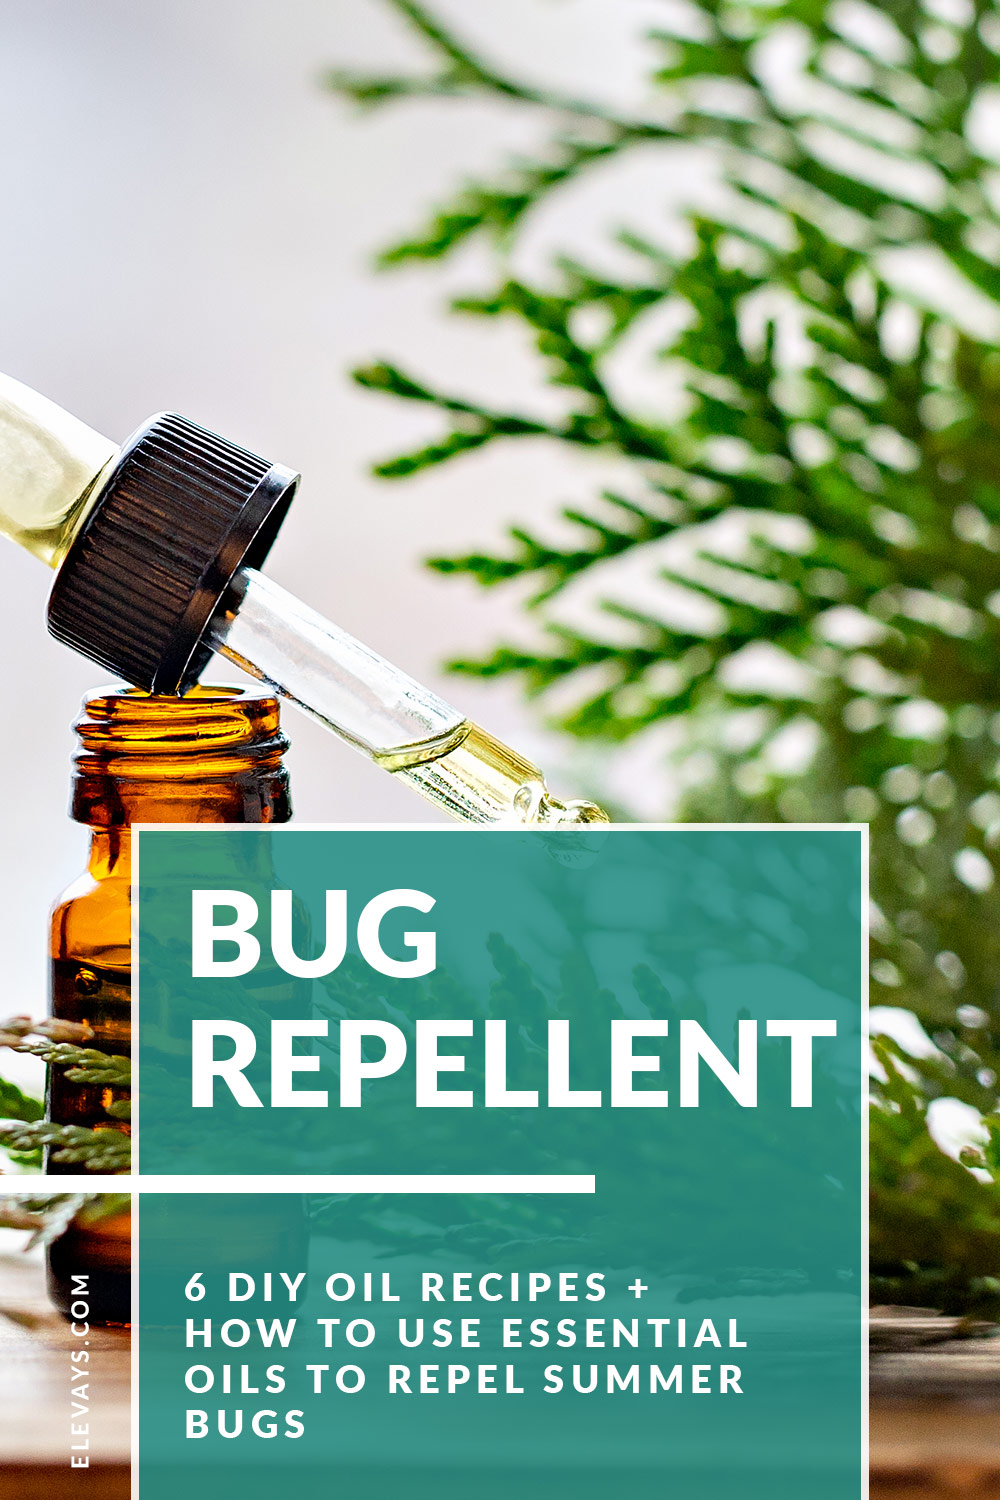 6 Essential Oil Recipes to Repel Summer Bugs